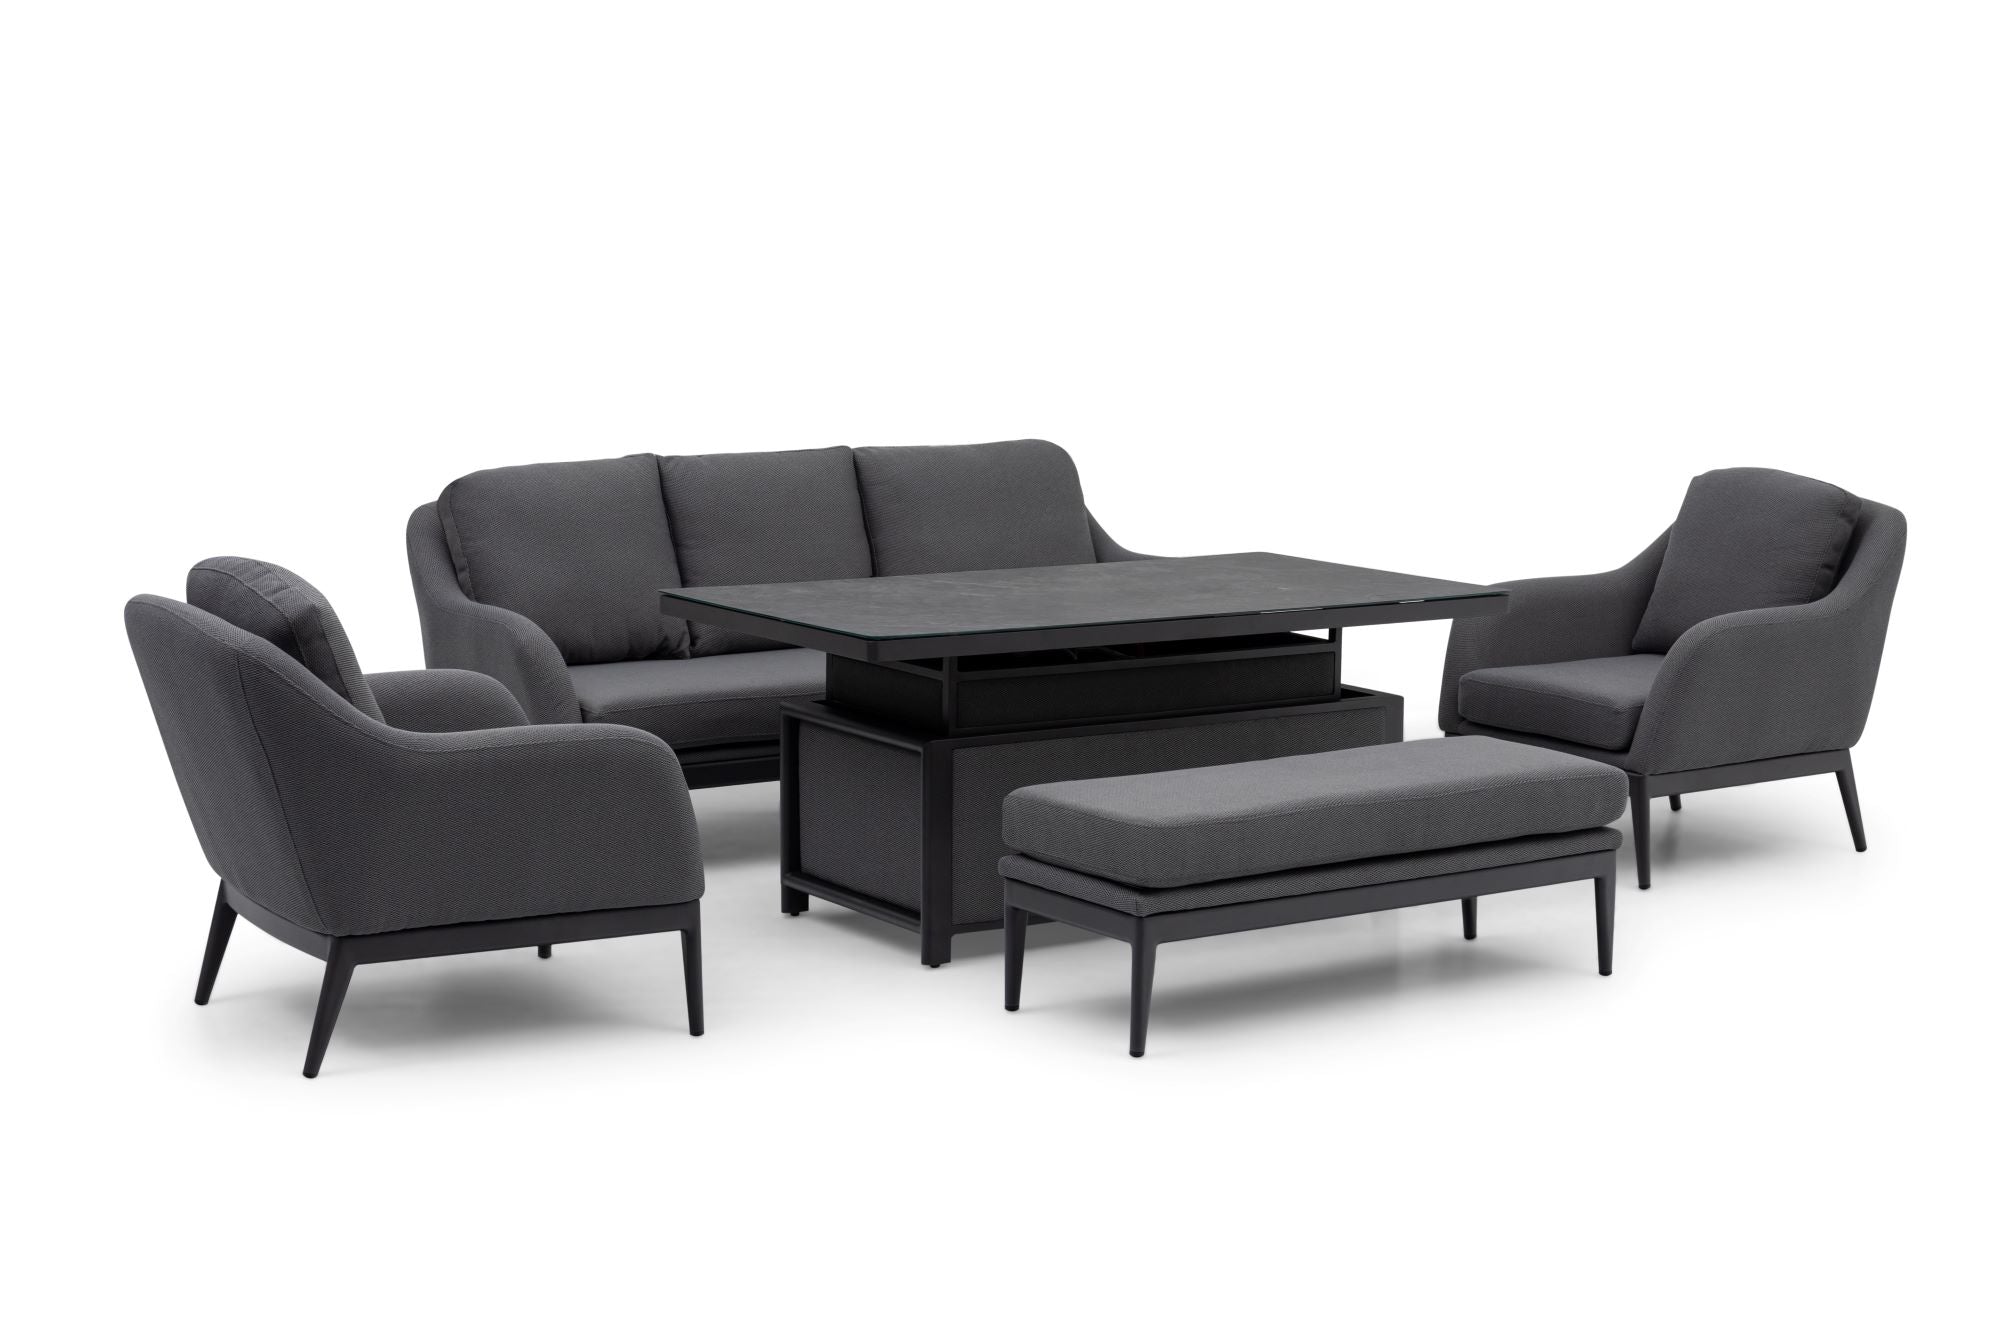 Luna 3 Seat Outdoor Fabric Sofa Set with Rising Table in Grey